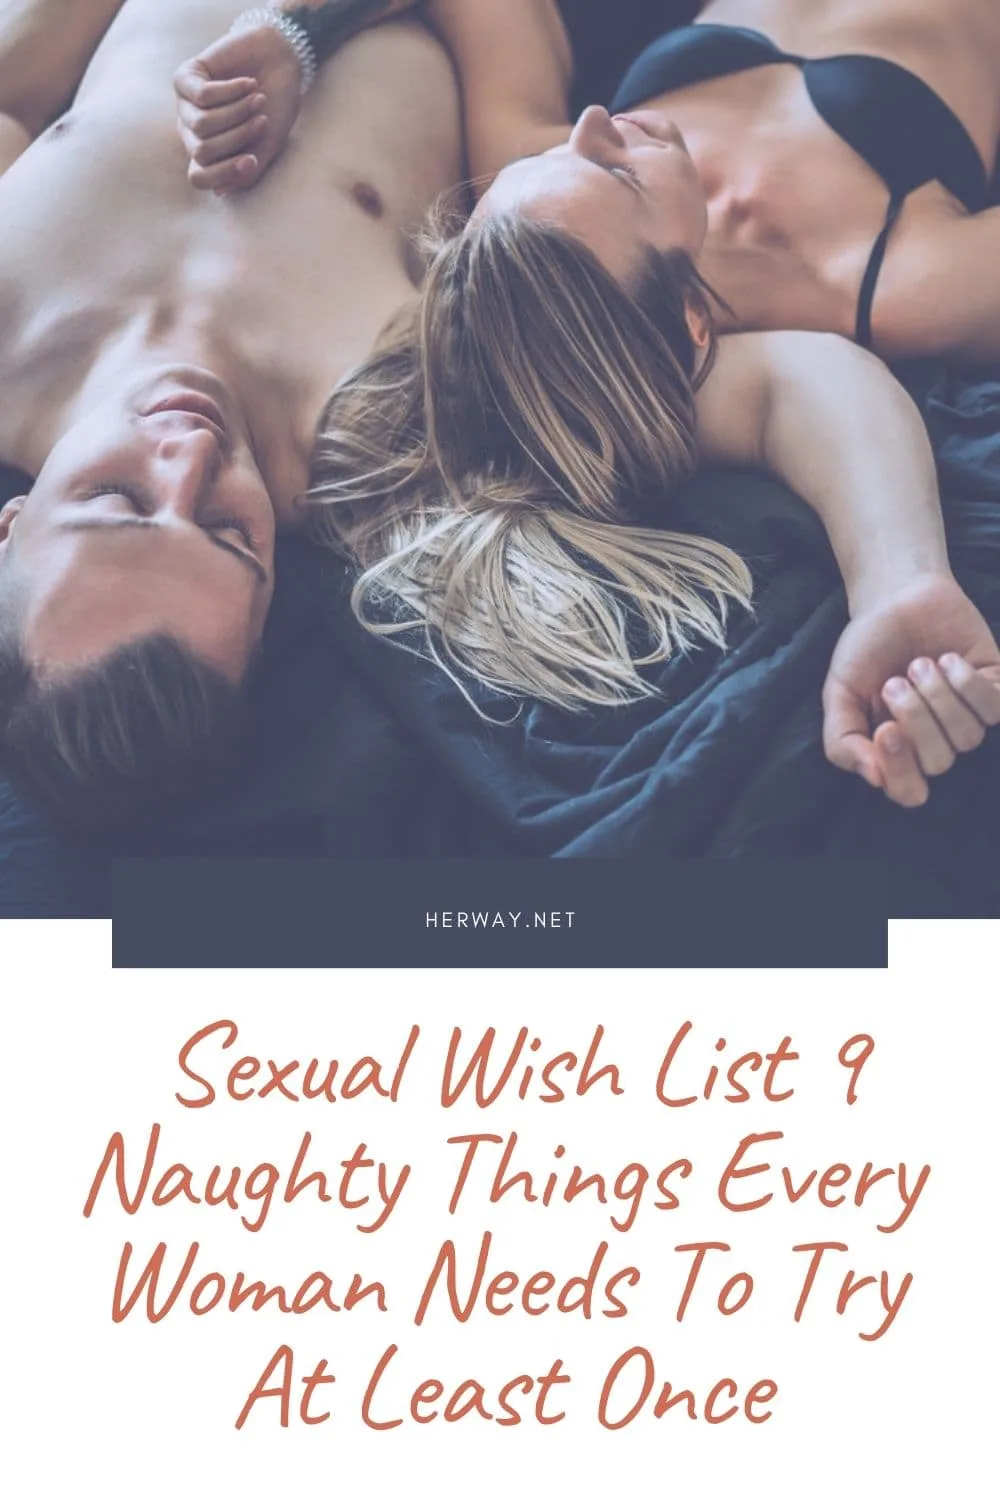 Sexual Wish List 9 Naughty Things Every Woman Needs To Try At Least Once